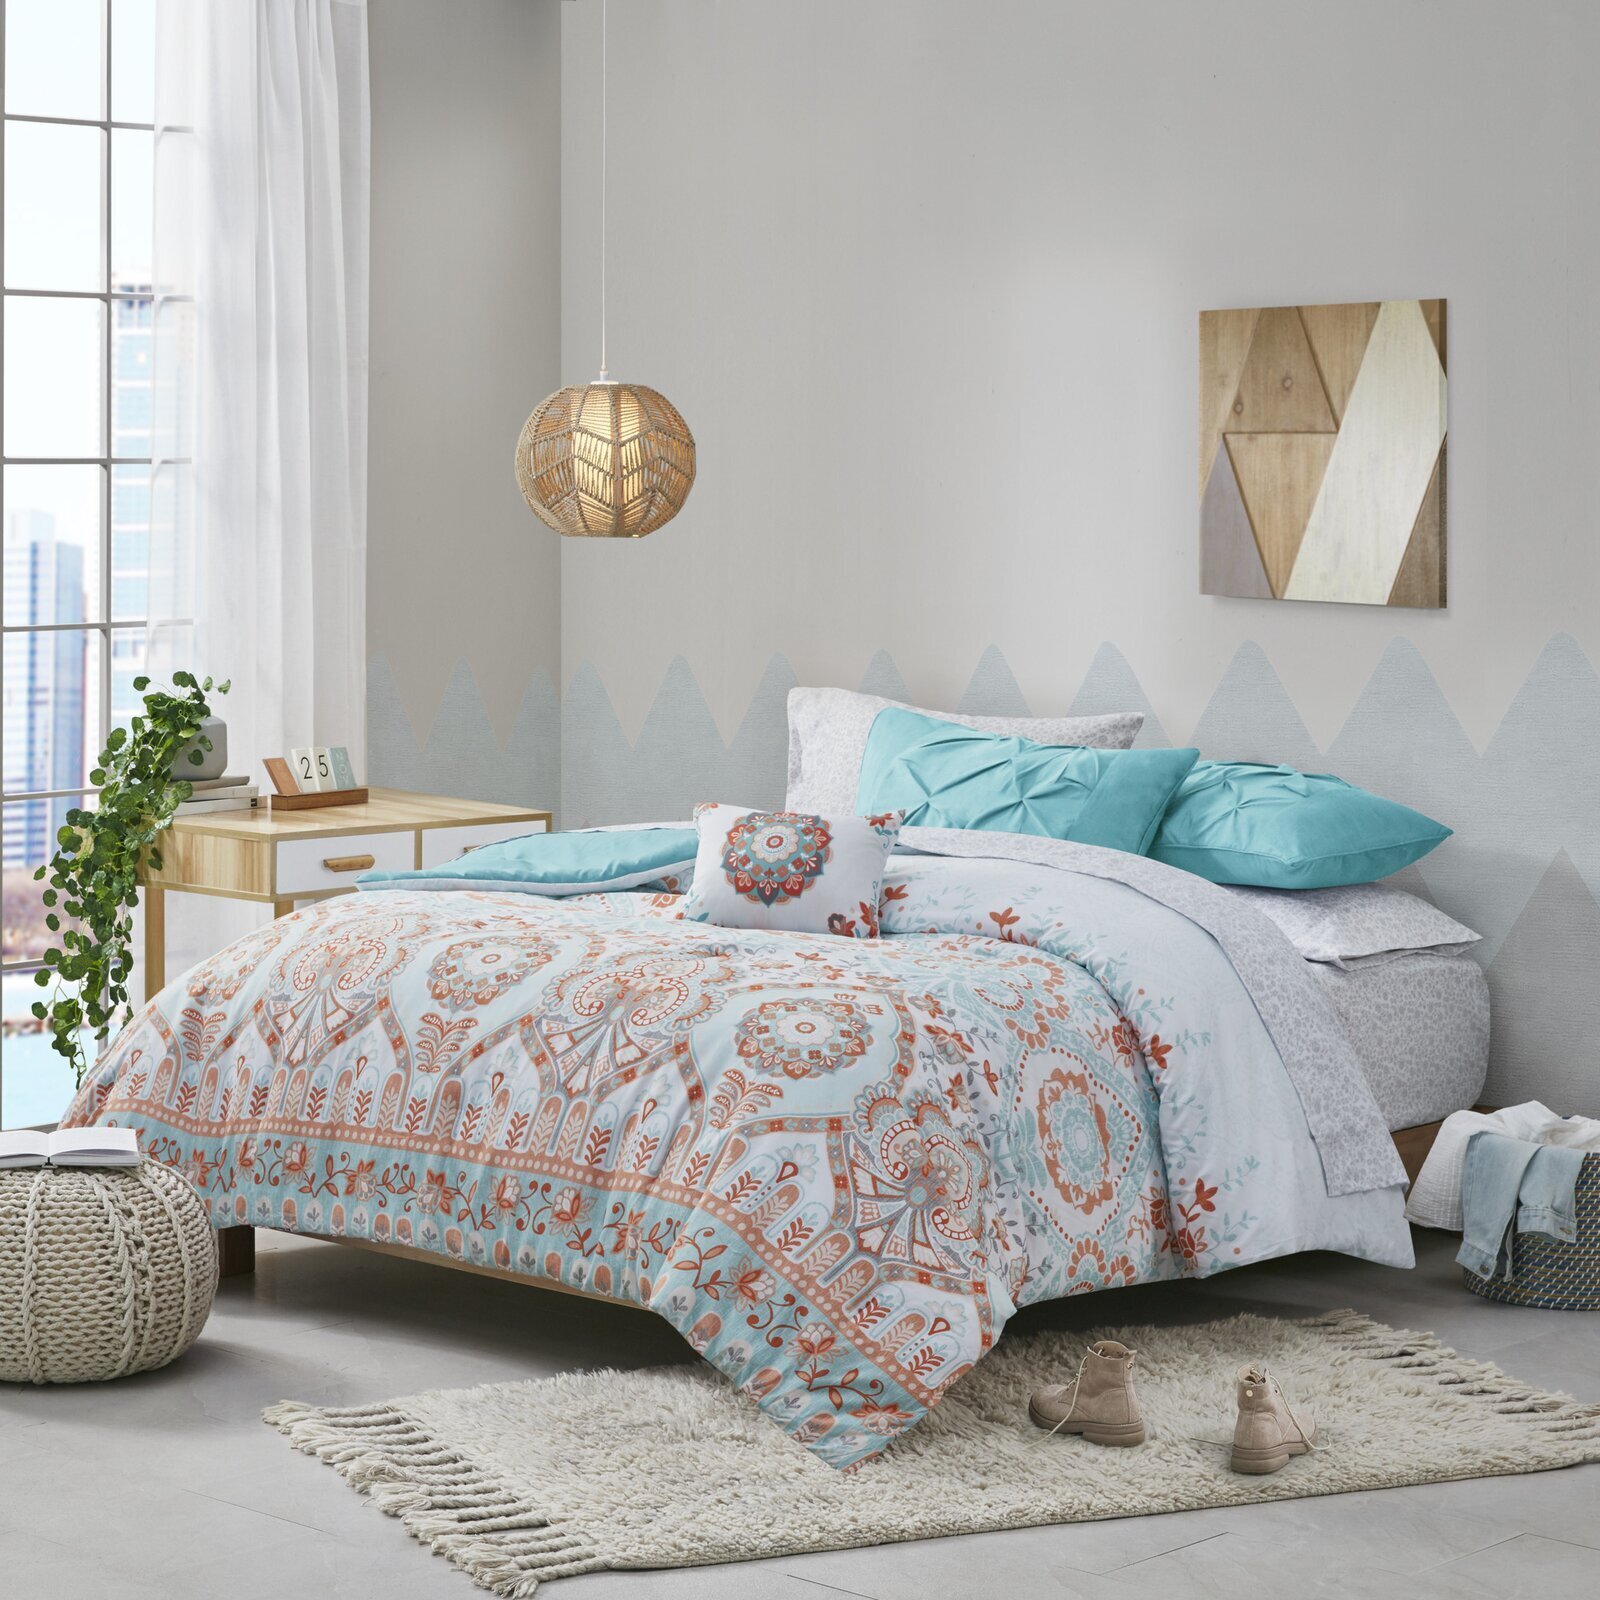 Teal and Coral Bedding Comforter Set